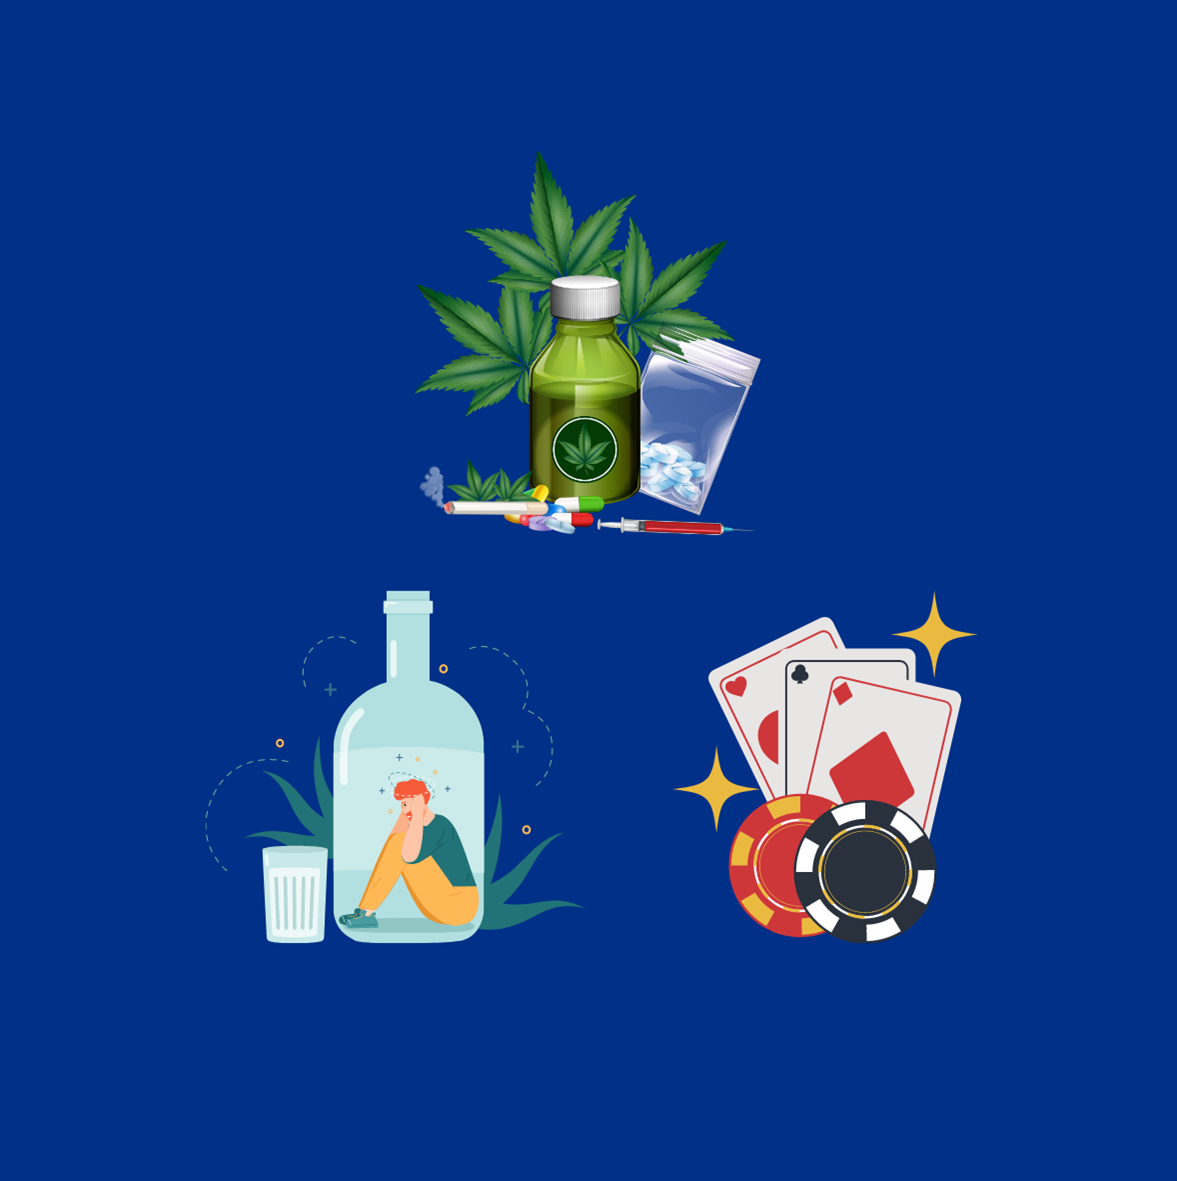 Images of Drugs, Alcohol and Gambling